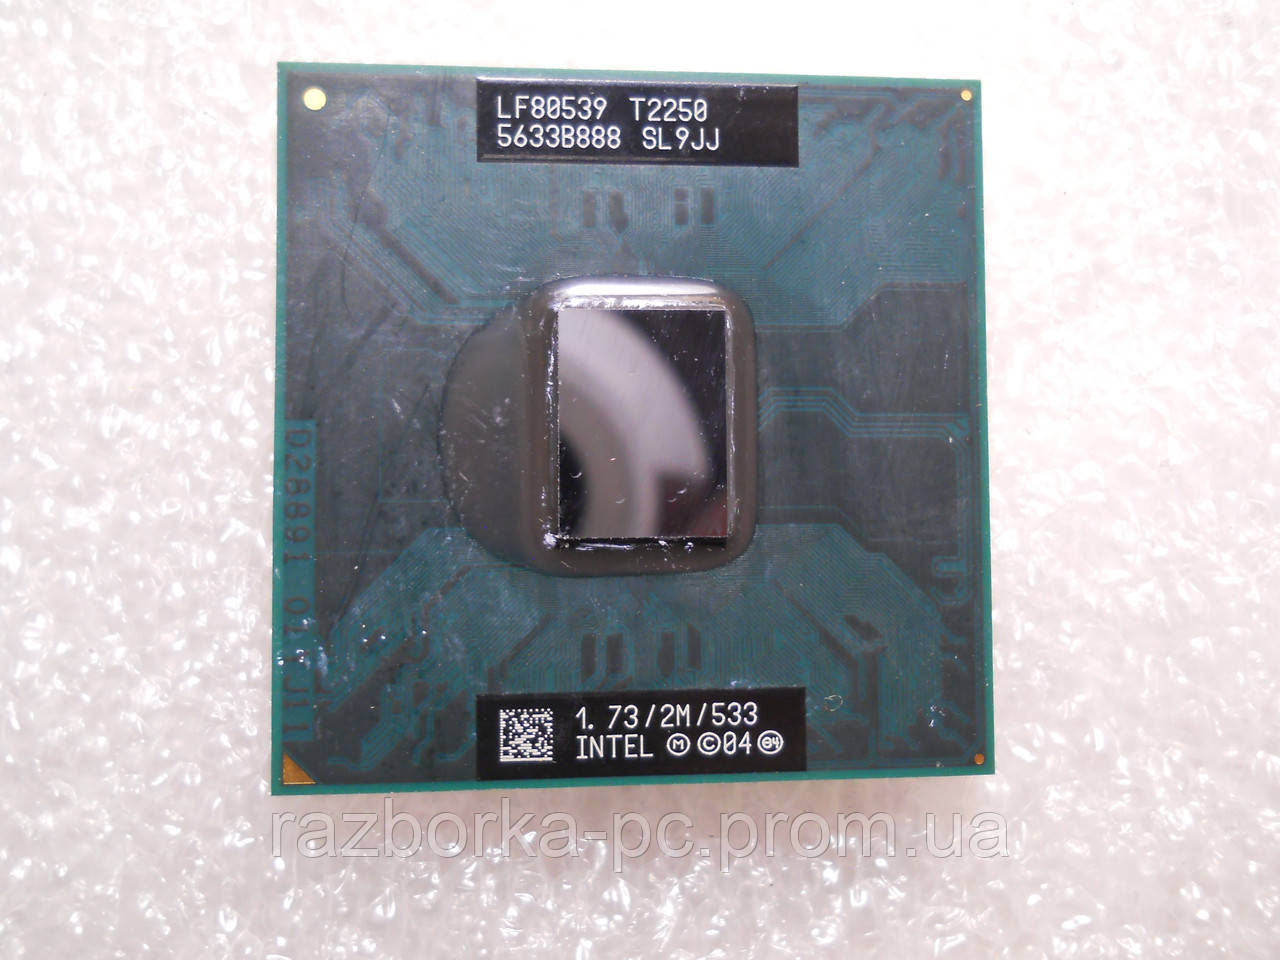 Intel Nh82801gb Motherboard Drivers For Windows 8